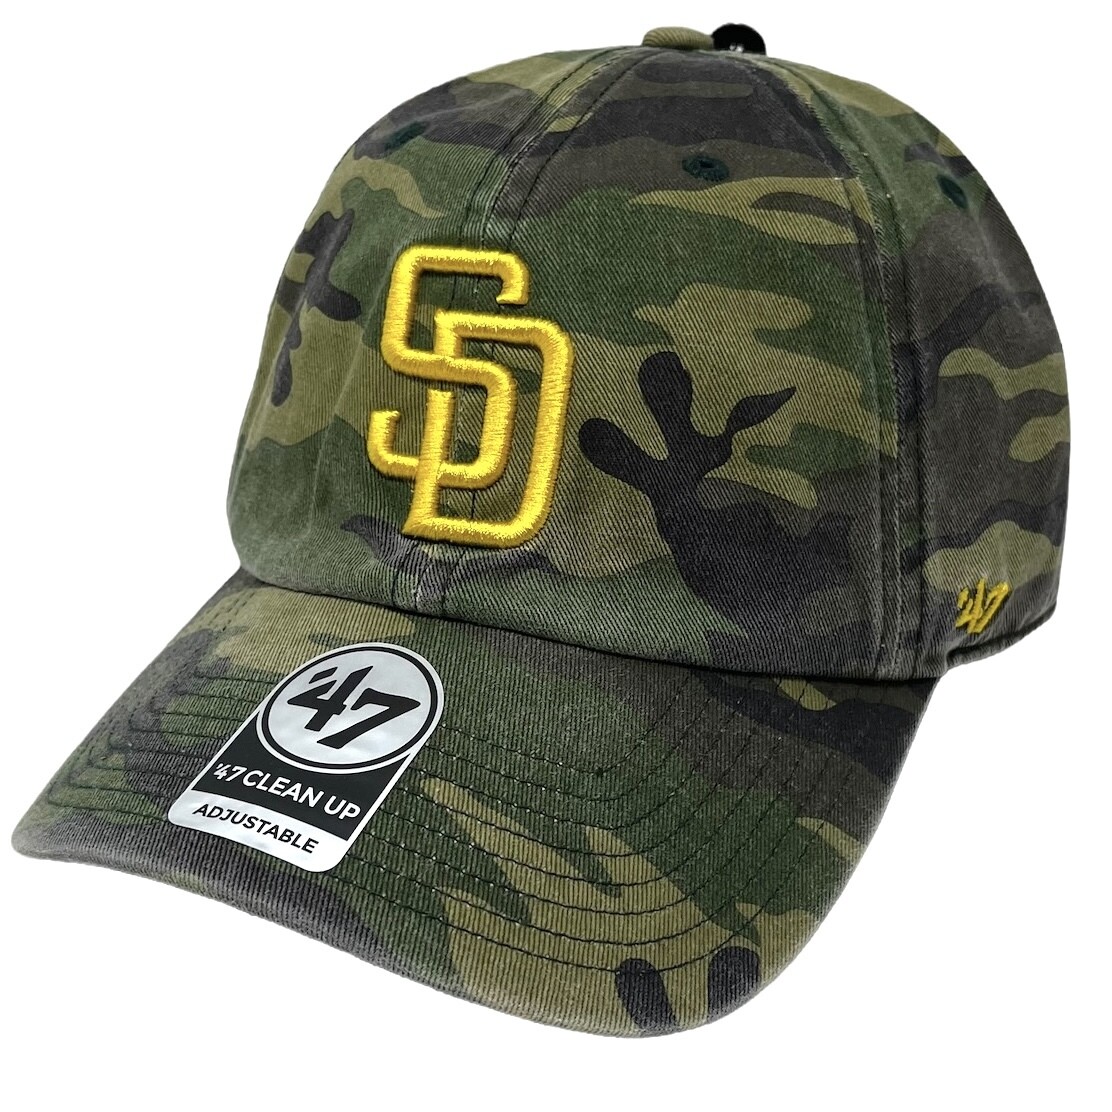 San Diego Padres Camo Clean Up Adjustable Style Hat